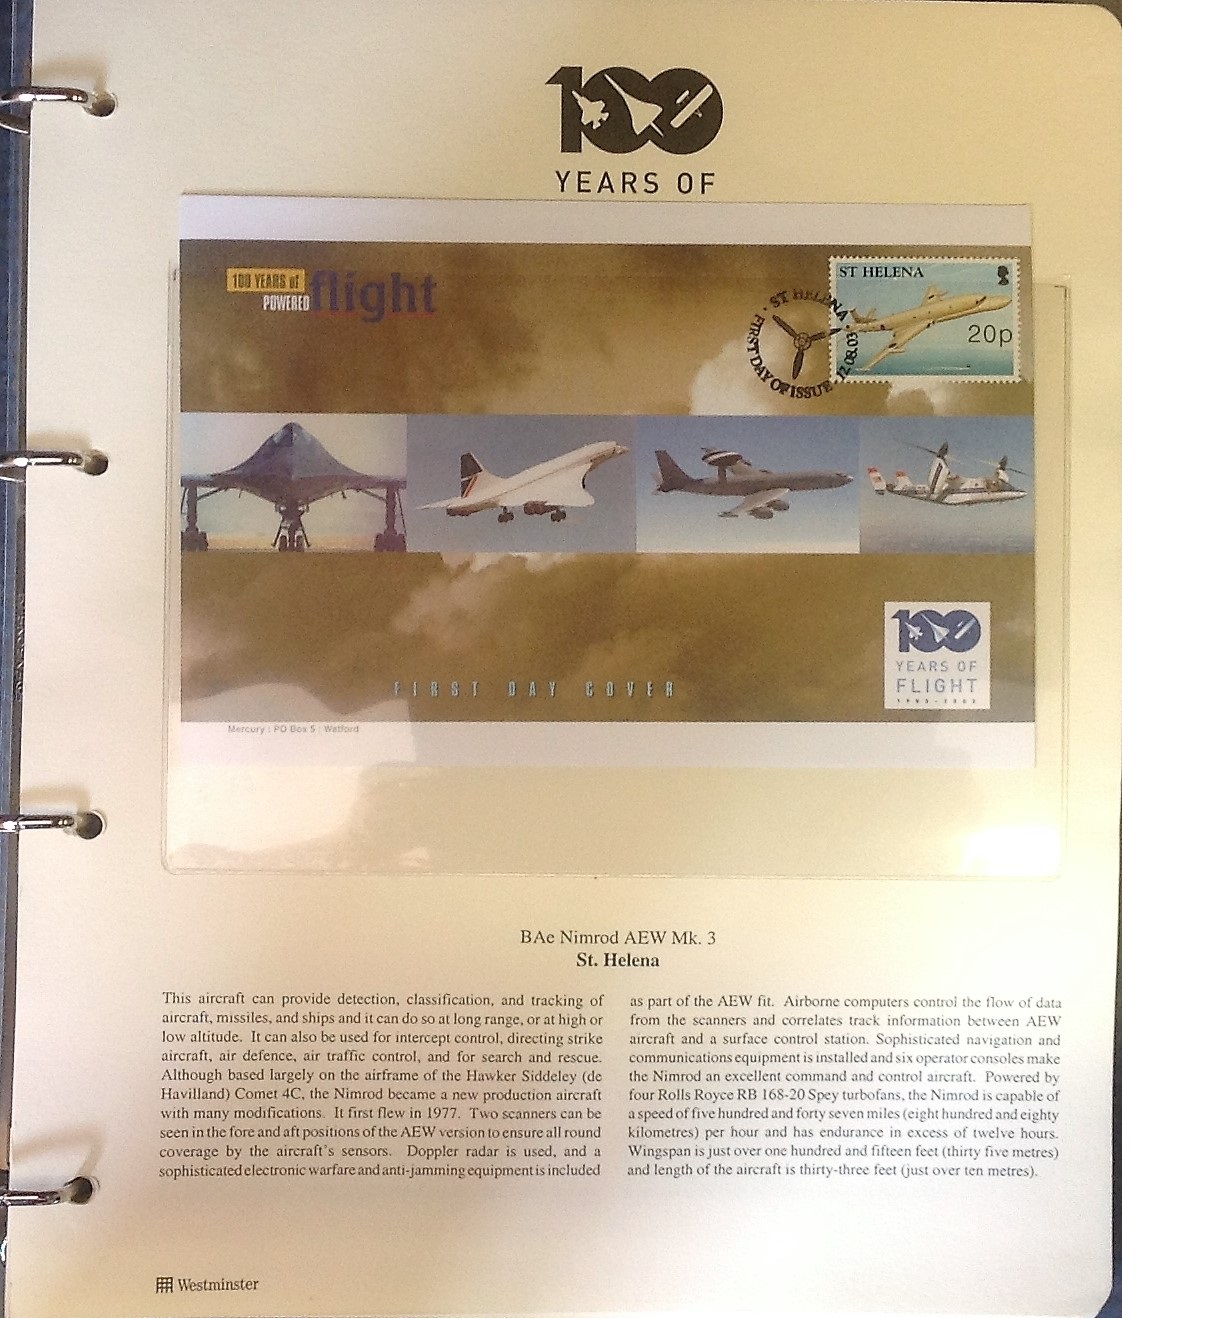 Aviation collection 100 years of flight includes 23 FDC and Coin covers featuring iconic planes